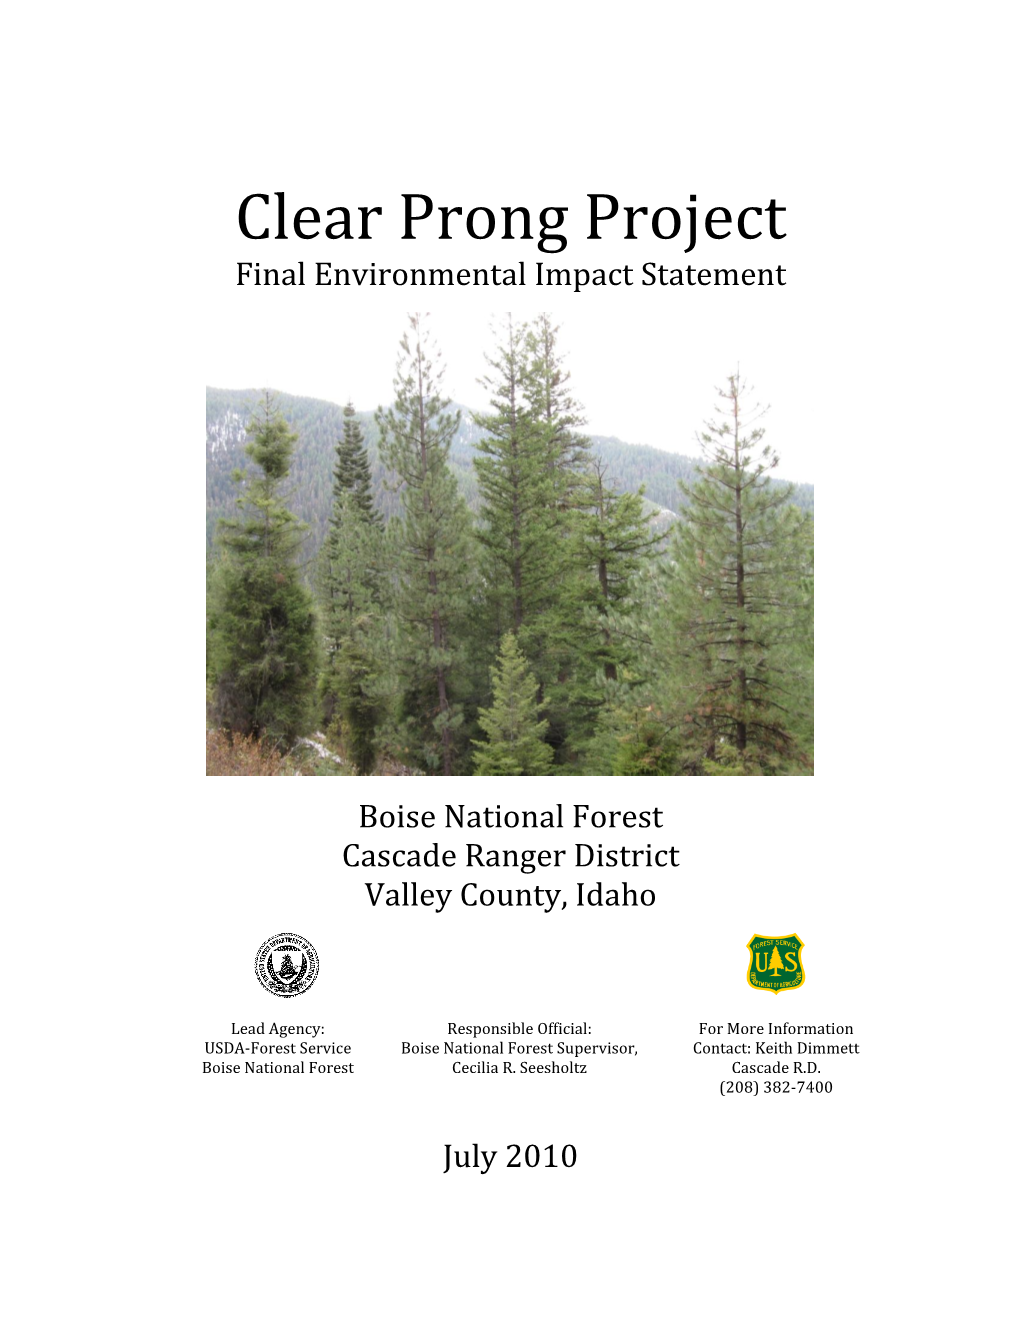 Clear Prong Project Final Environmental Impact Statement